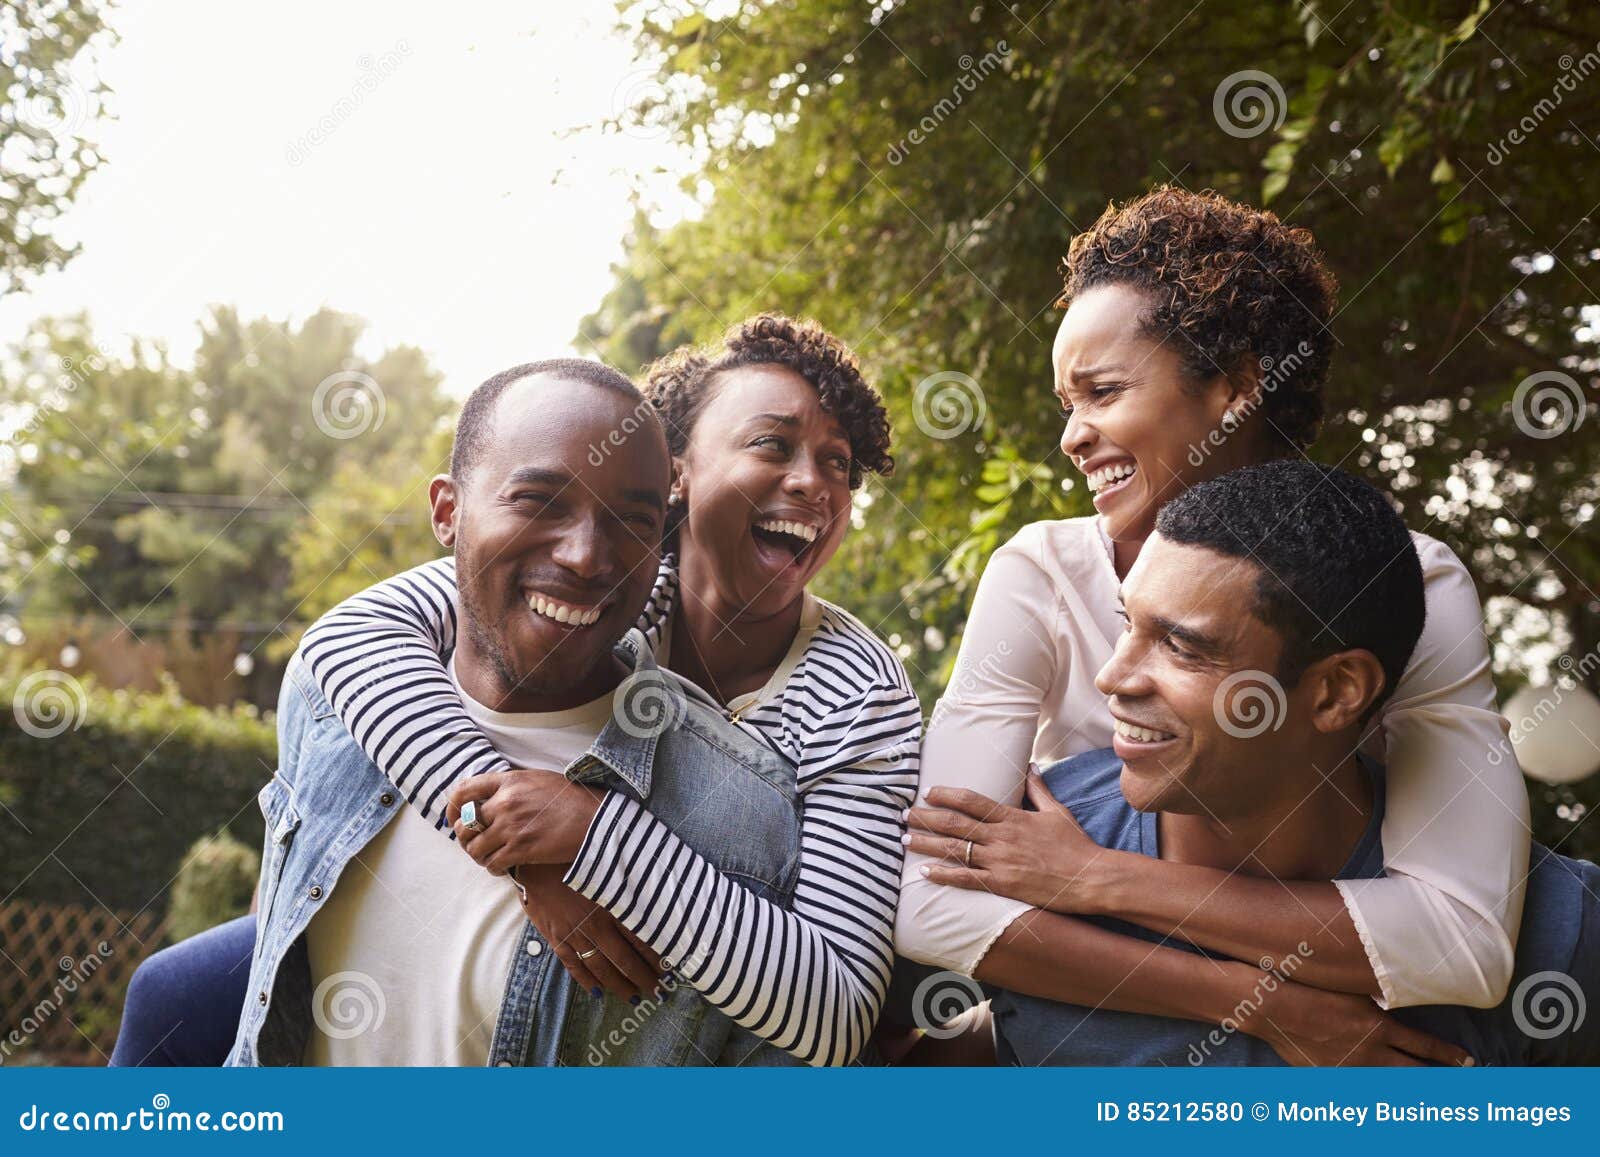 two young adult black couples having fun piggybacking